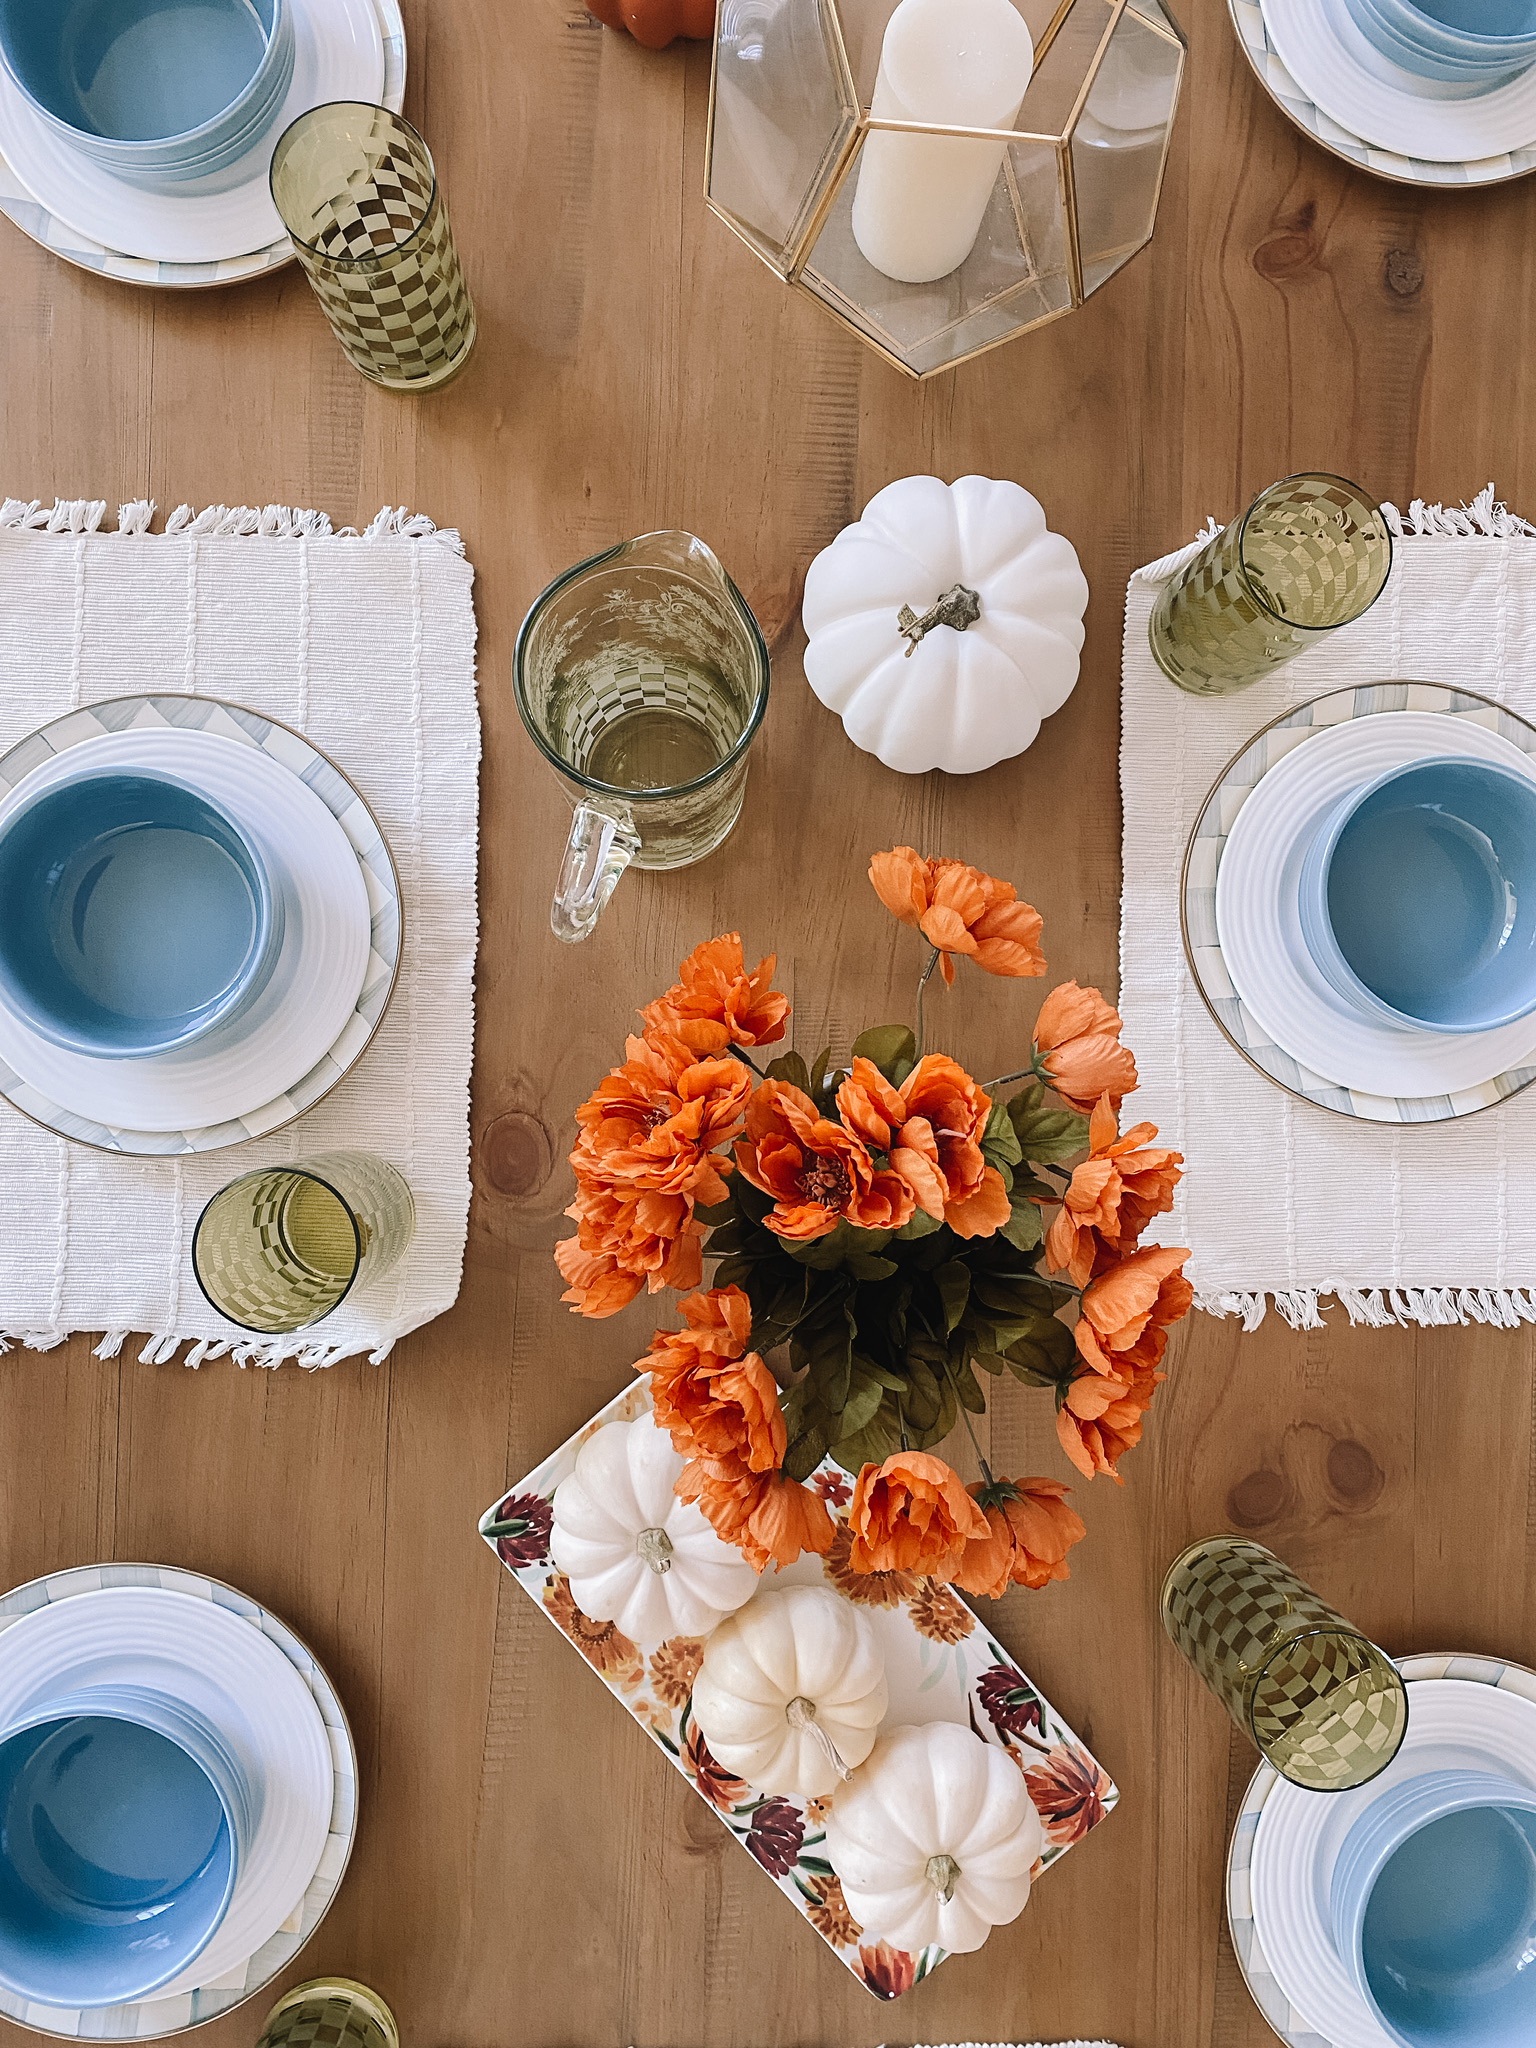 THE TRANSITIONAL FALL TABLE YOU’LL LOVE